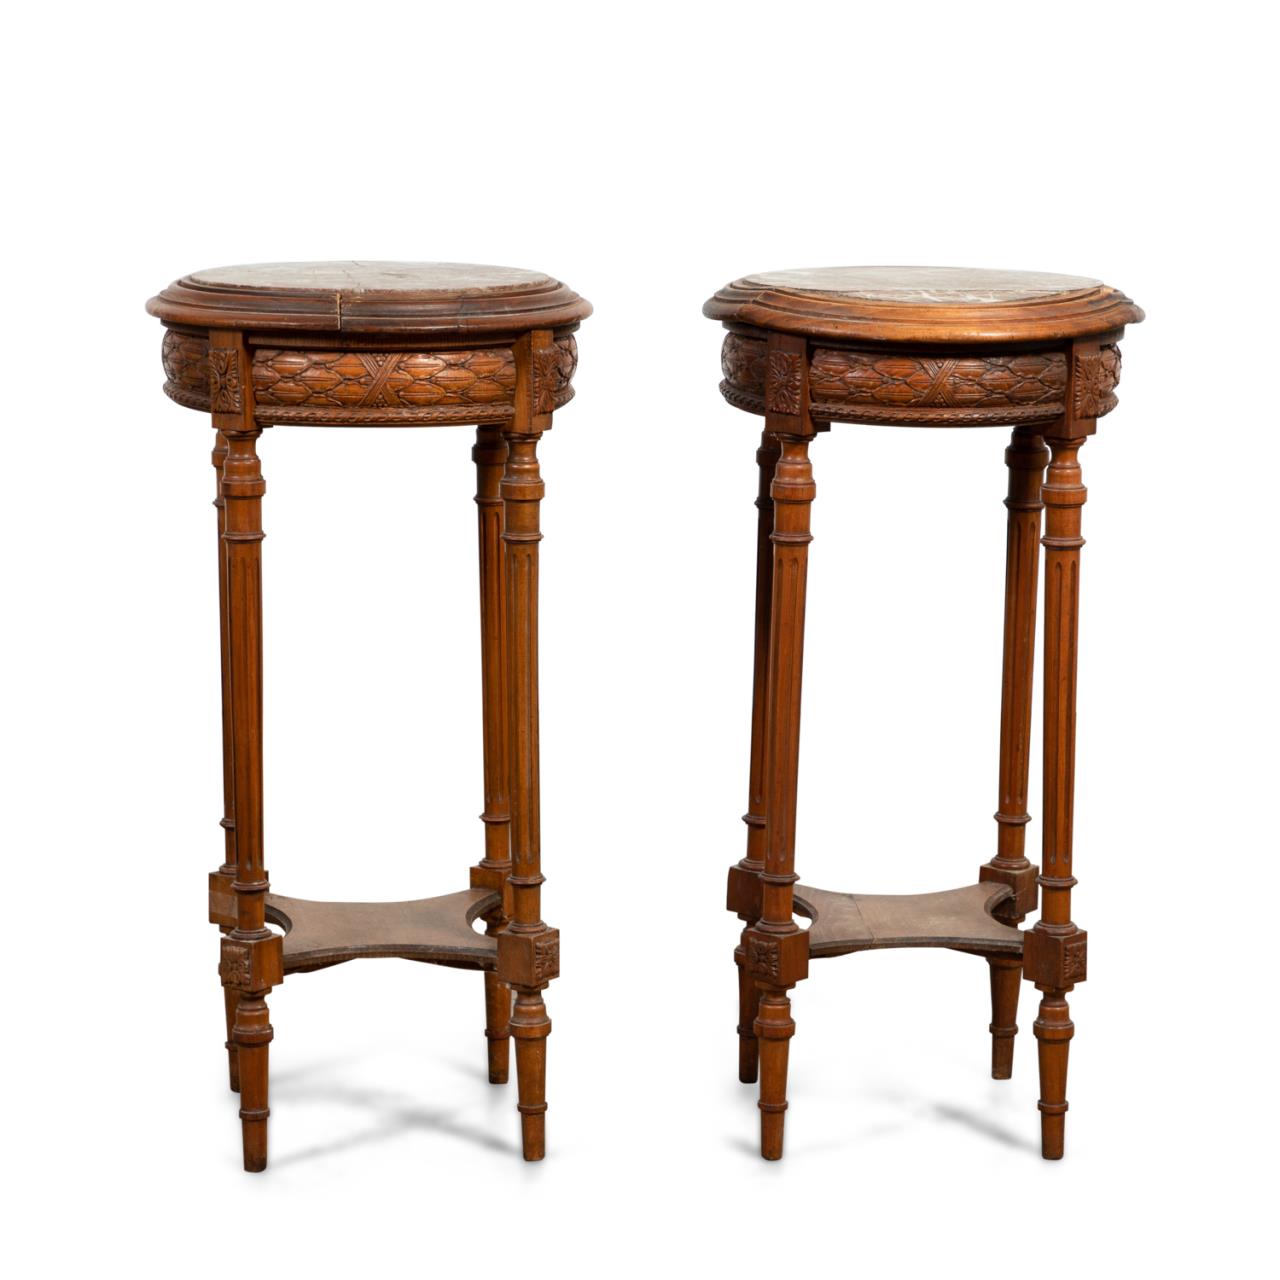 PAIR OF FRENCH MAHOGANY AND MARBLE